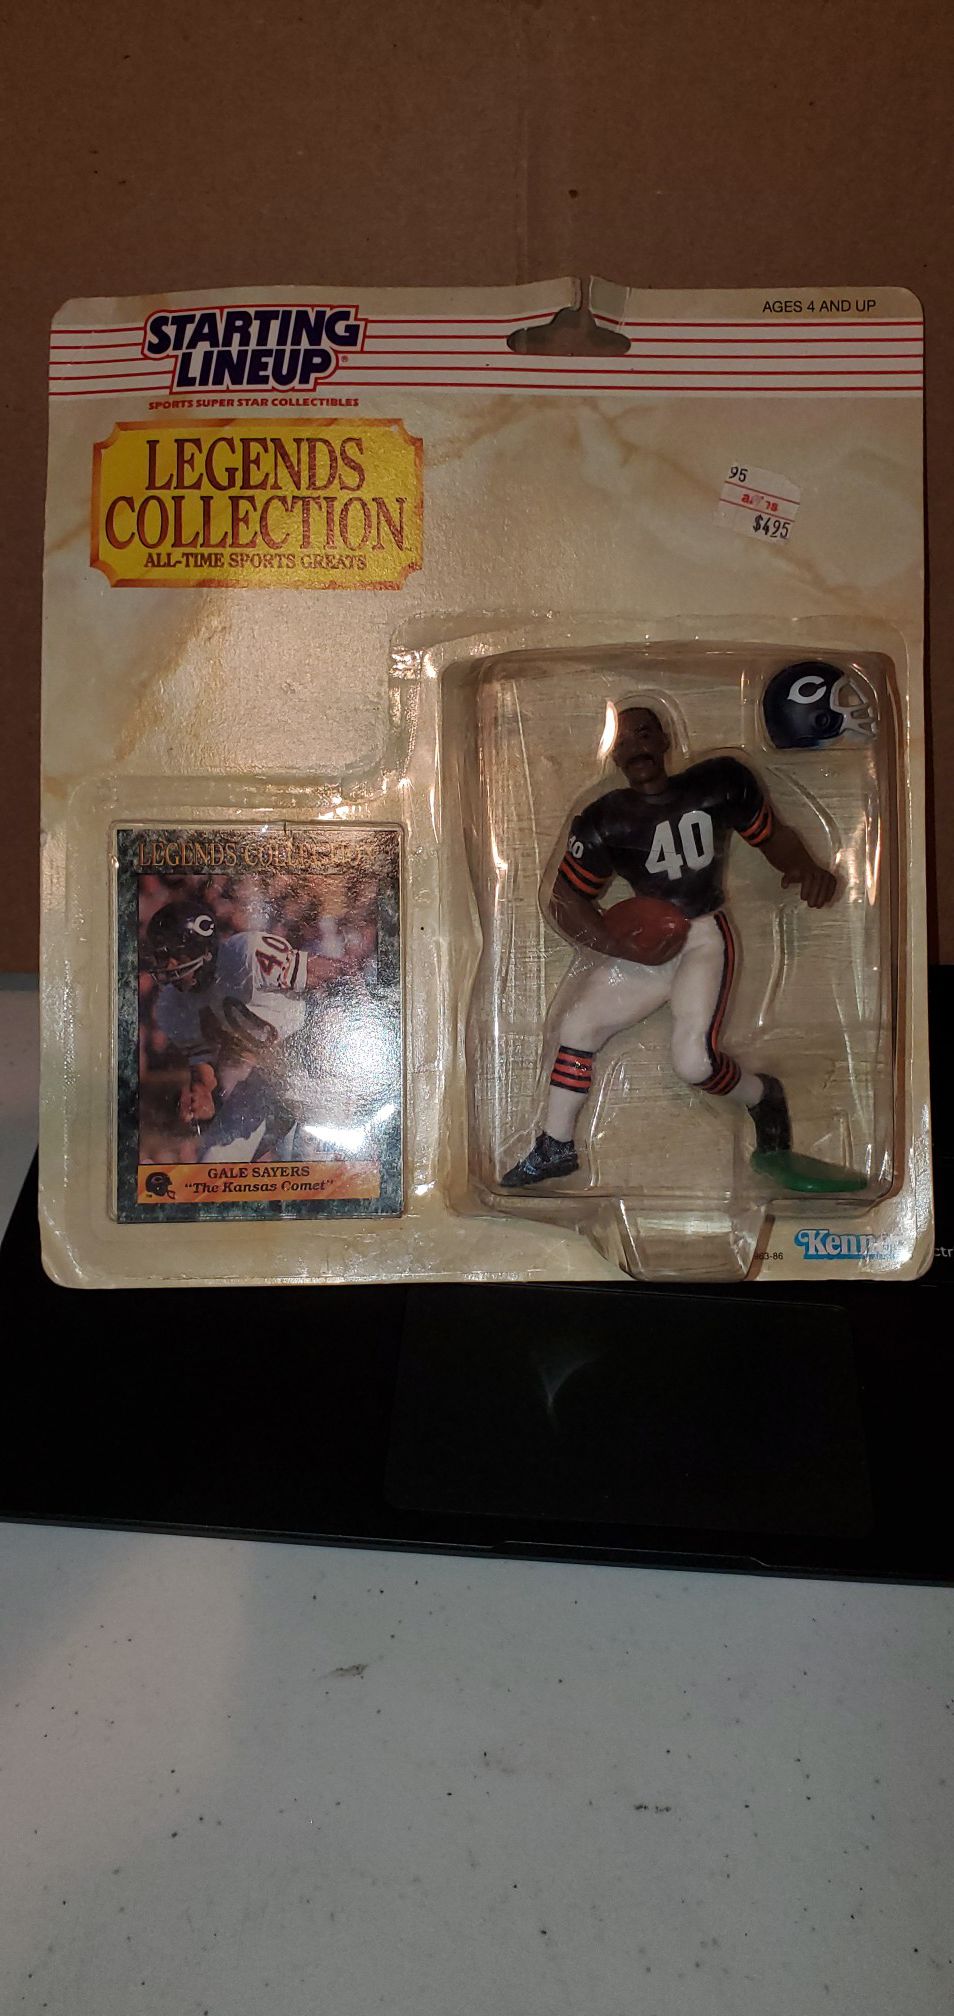 Gayle Sayers Kenner legends collection